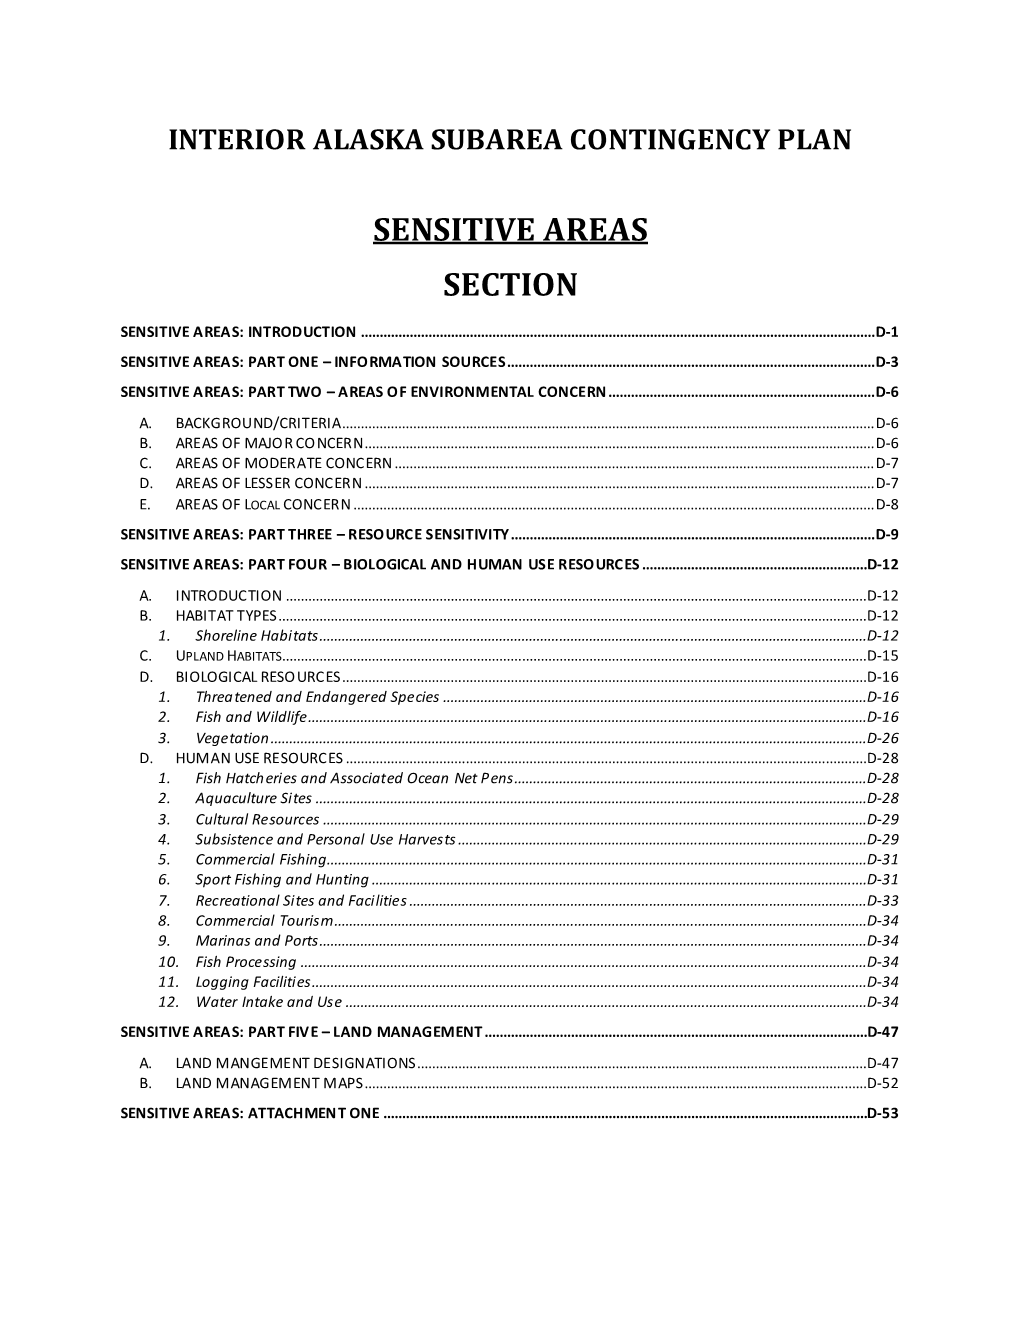 Sensitive Areas Section